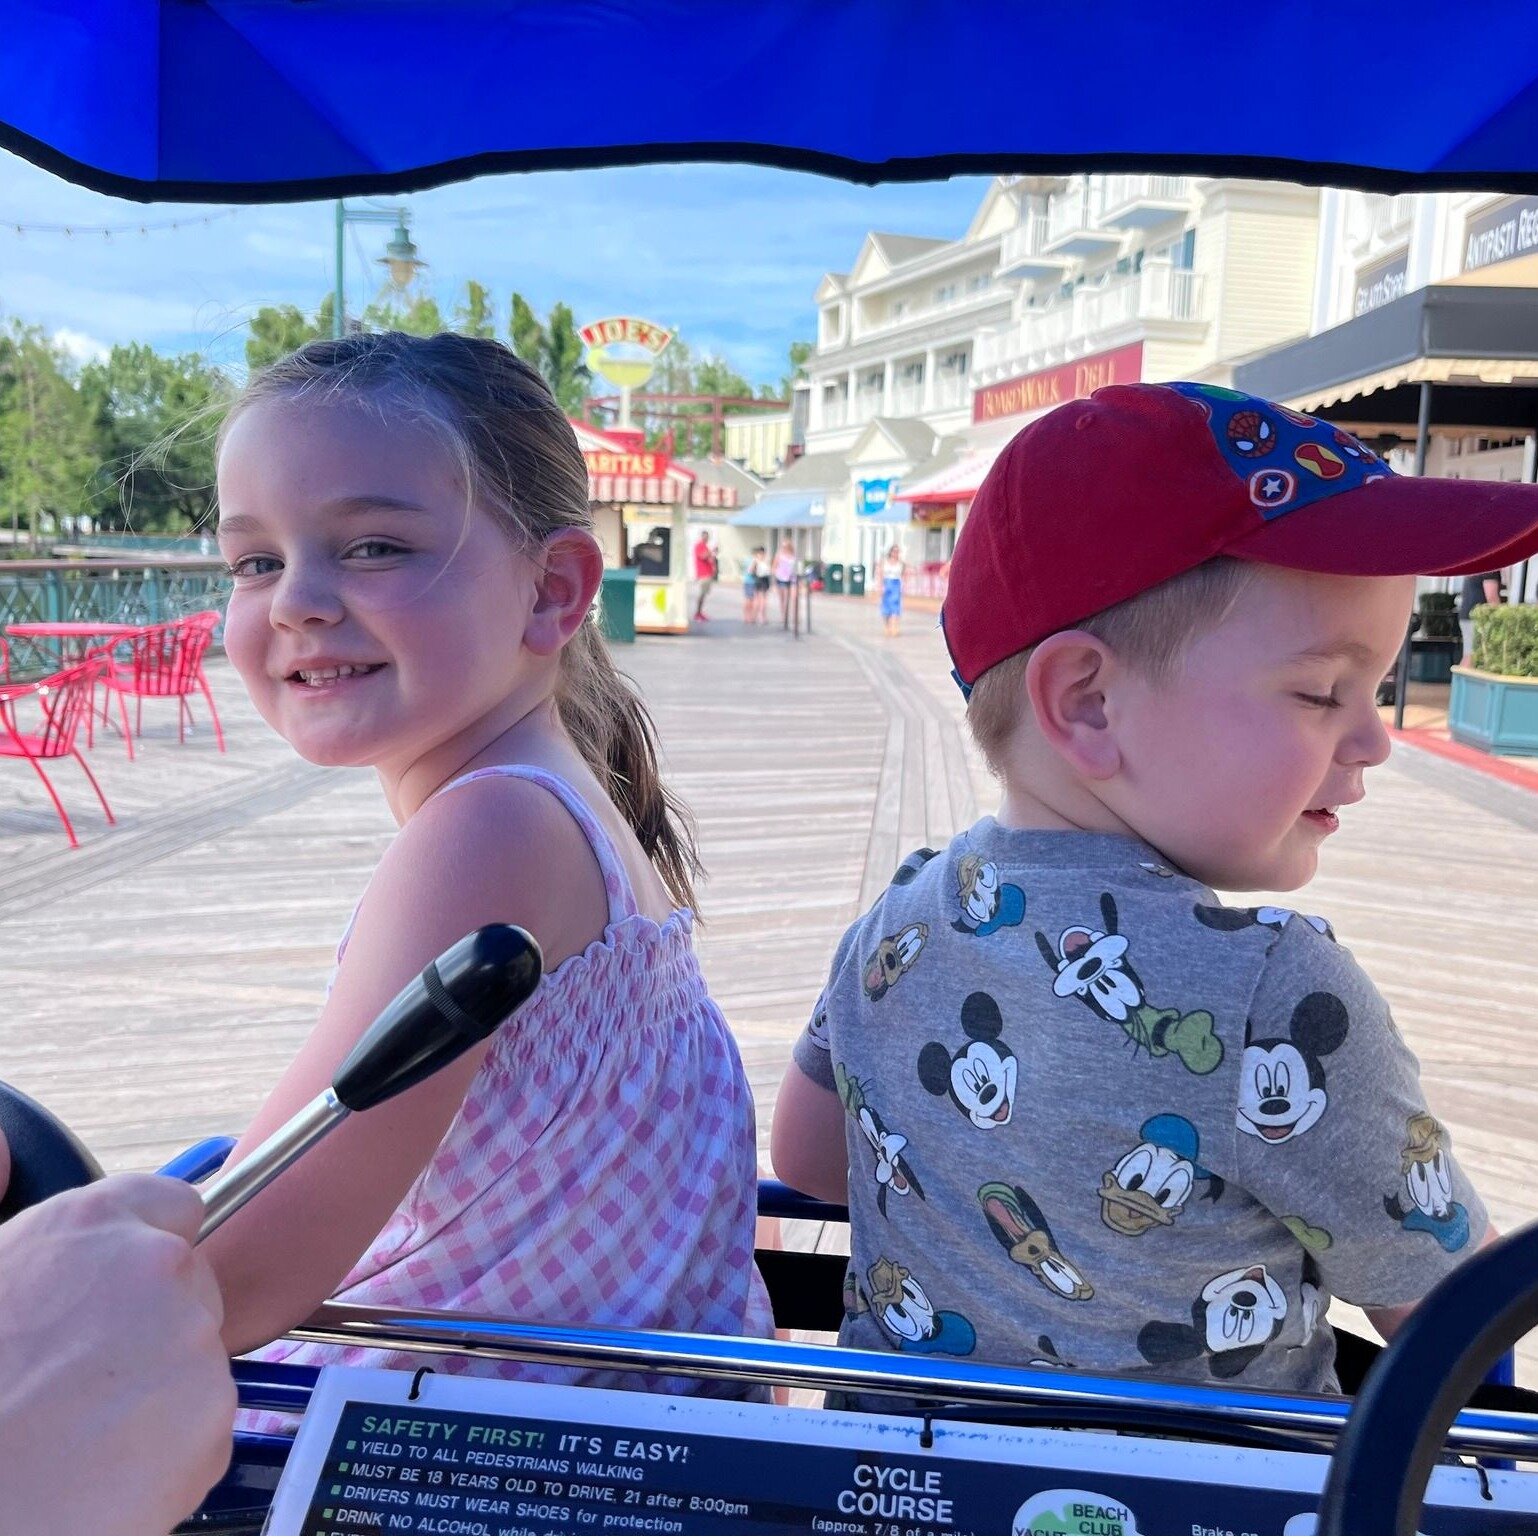 In honor of #NationalBikeToWork - Did you know you can rent Surrey Bikes at Disney Boardwalk's in Walt Disney World? These are an unique way to take in the sights of the Boardwalk. Pro-Tip: Do not show your children how the bell works if they are sit